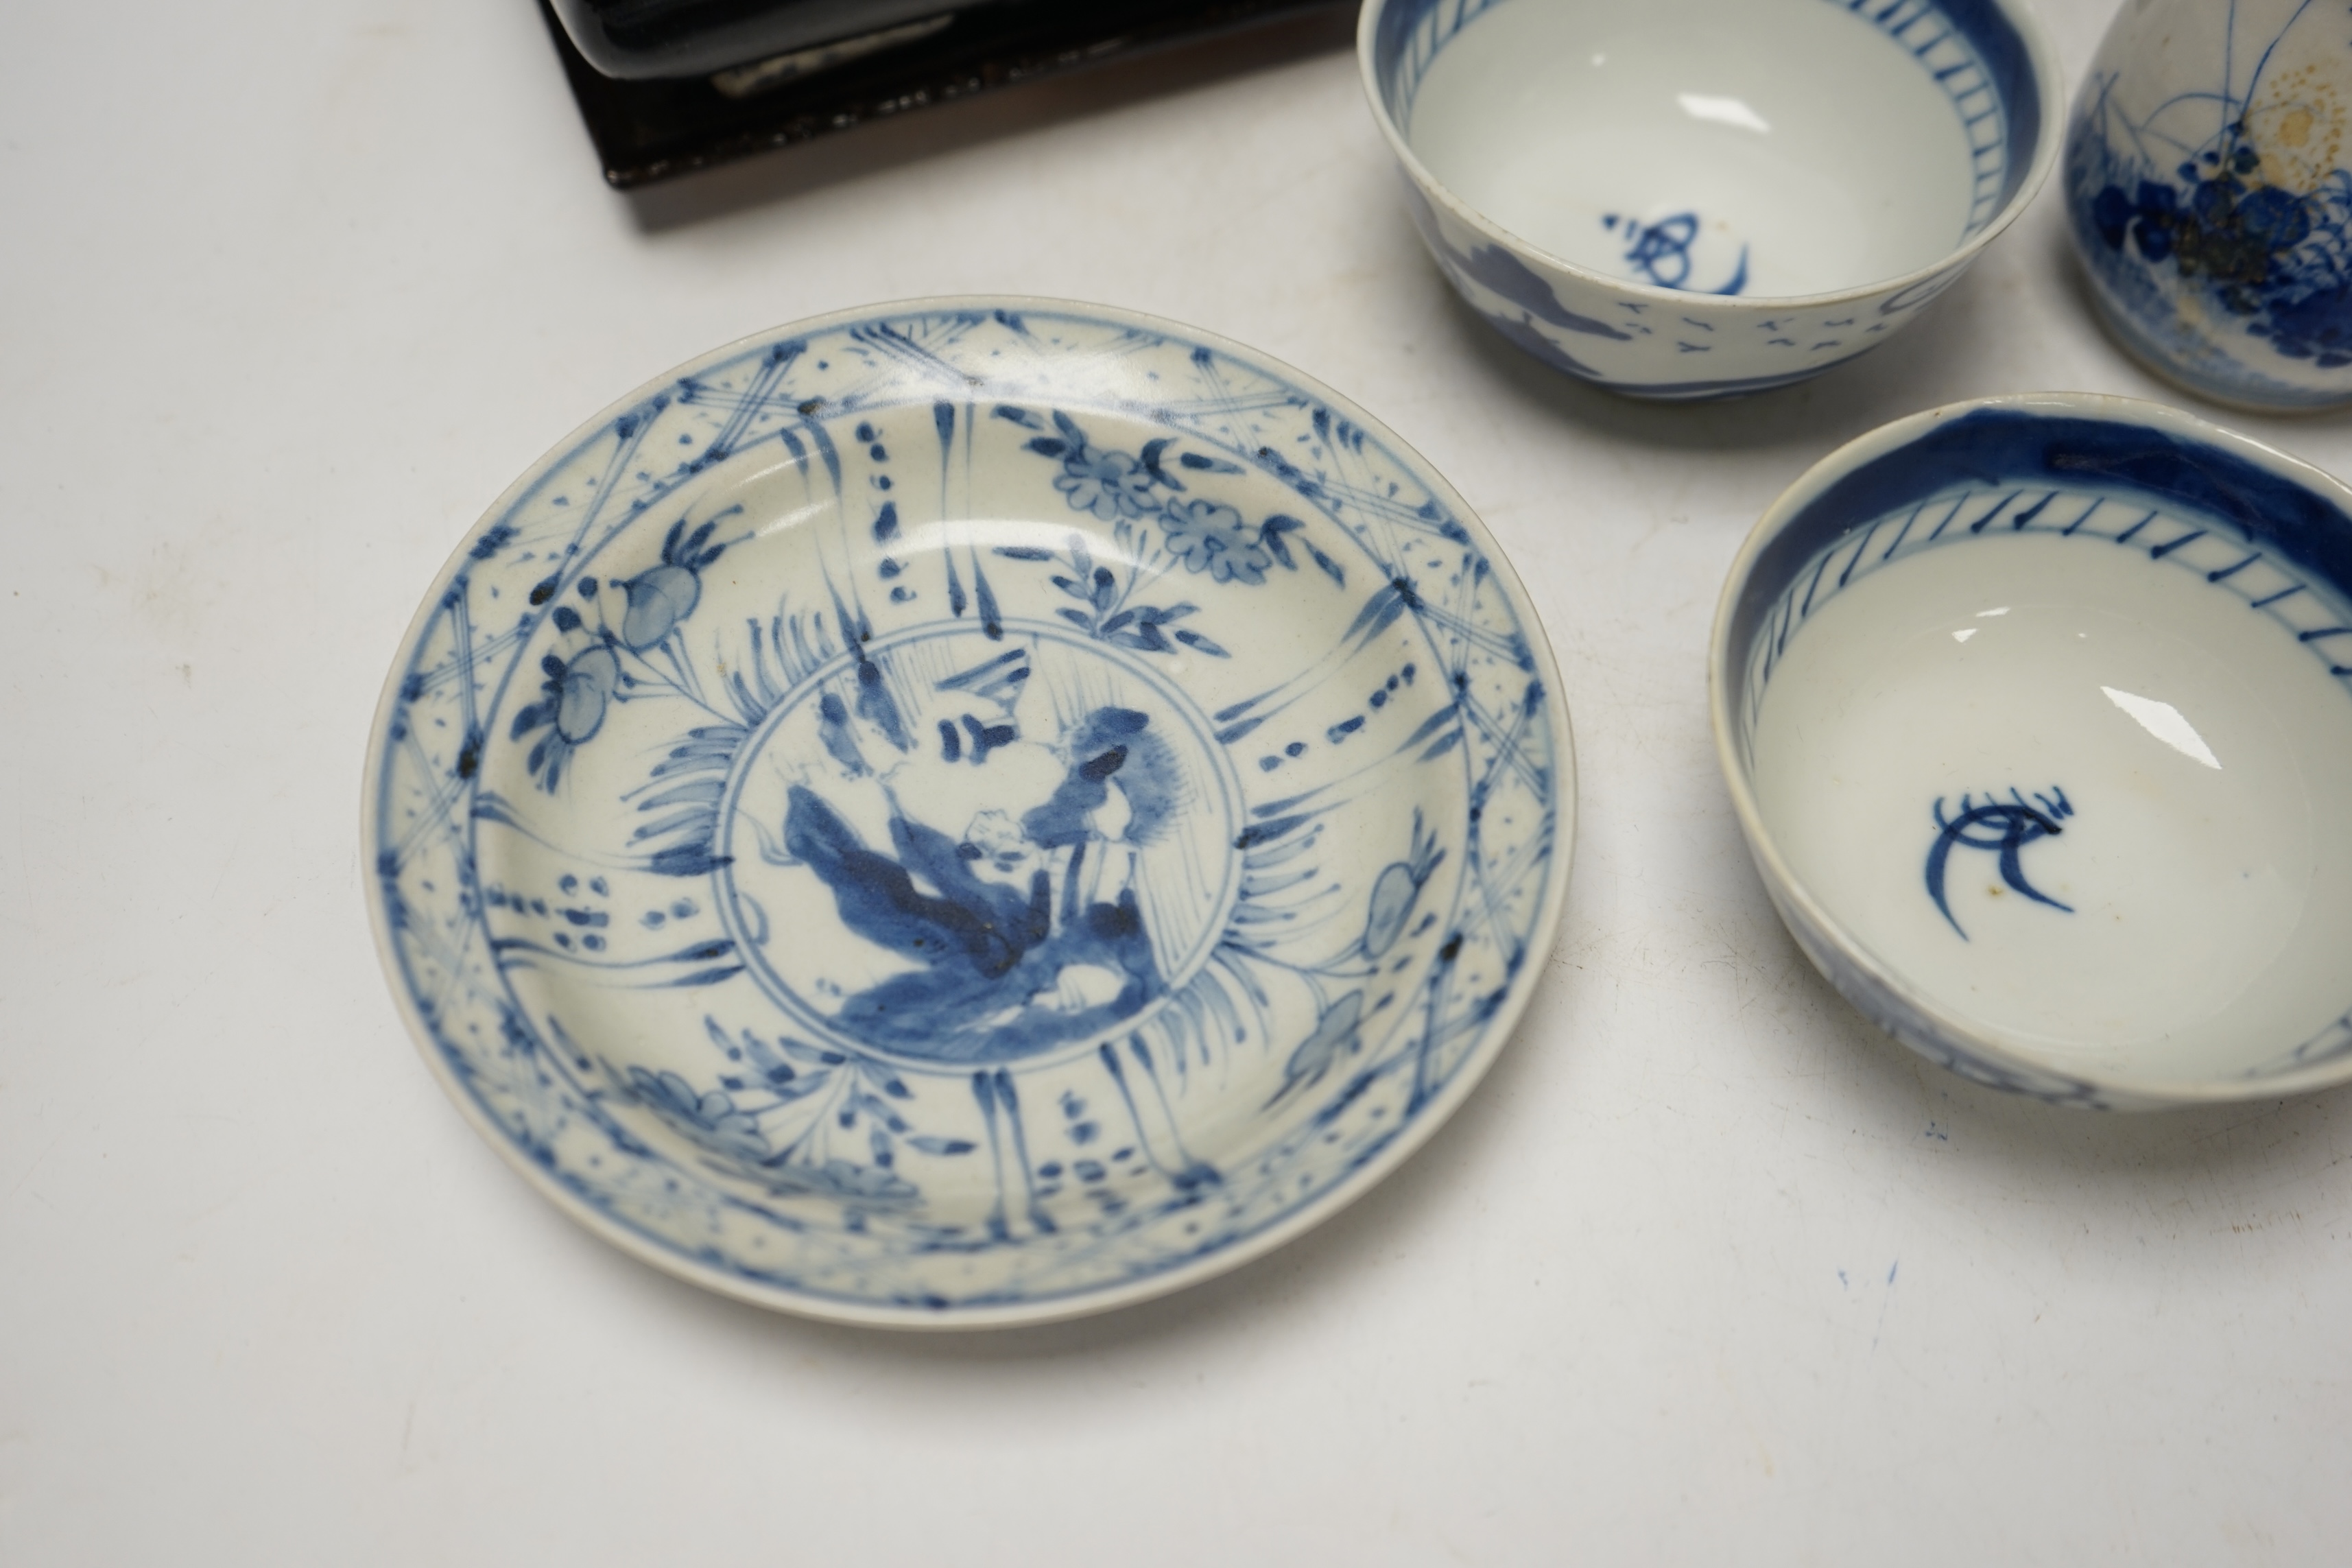 Chinese ceramics to include blue and white bowls and vases, largest 15cm wide. Condition - poor to fair